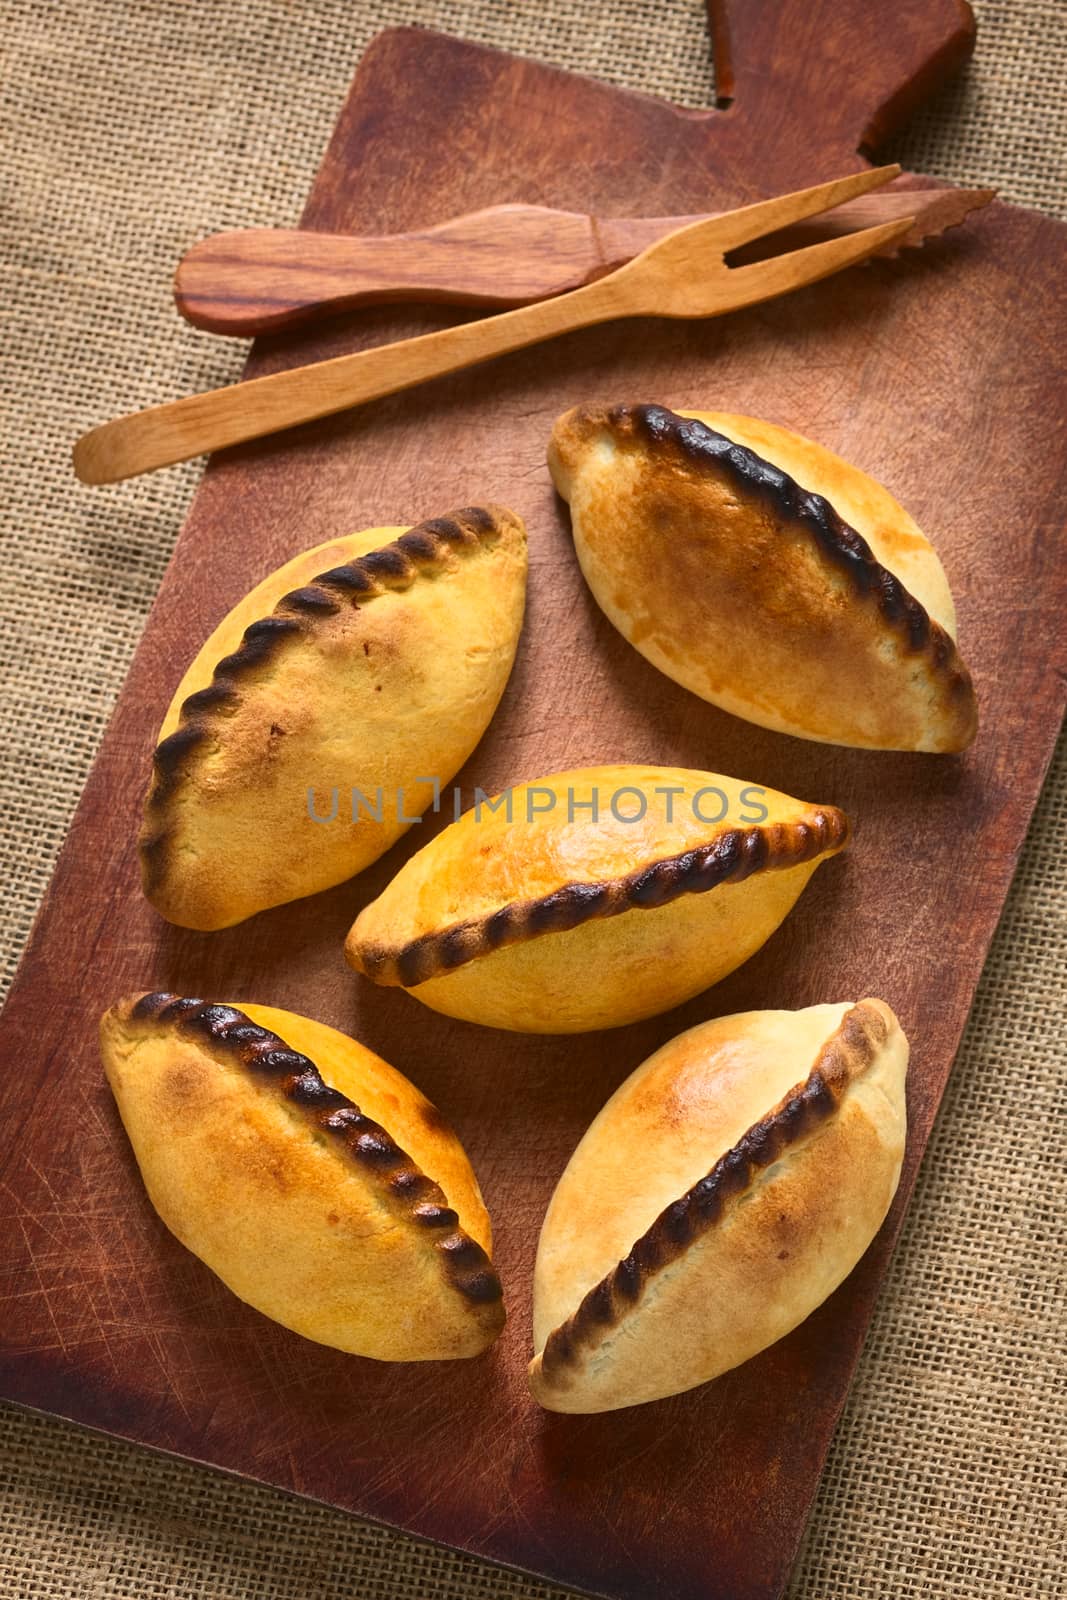 Traditional Bolivian savory pastries called Saltena filled with thick meat stew, which is a popular street snack in Bolivia, photographed on wood with natural light (Selective Focus, Focus on the top of the saltenas)